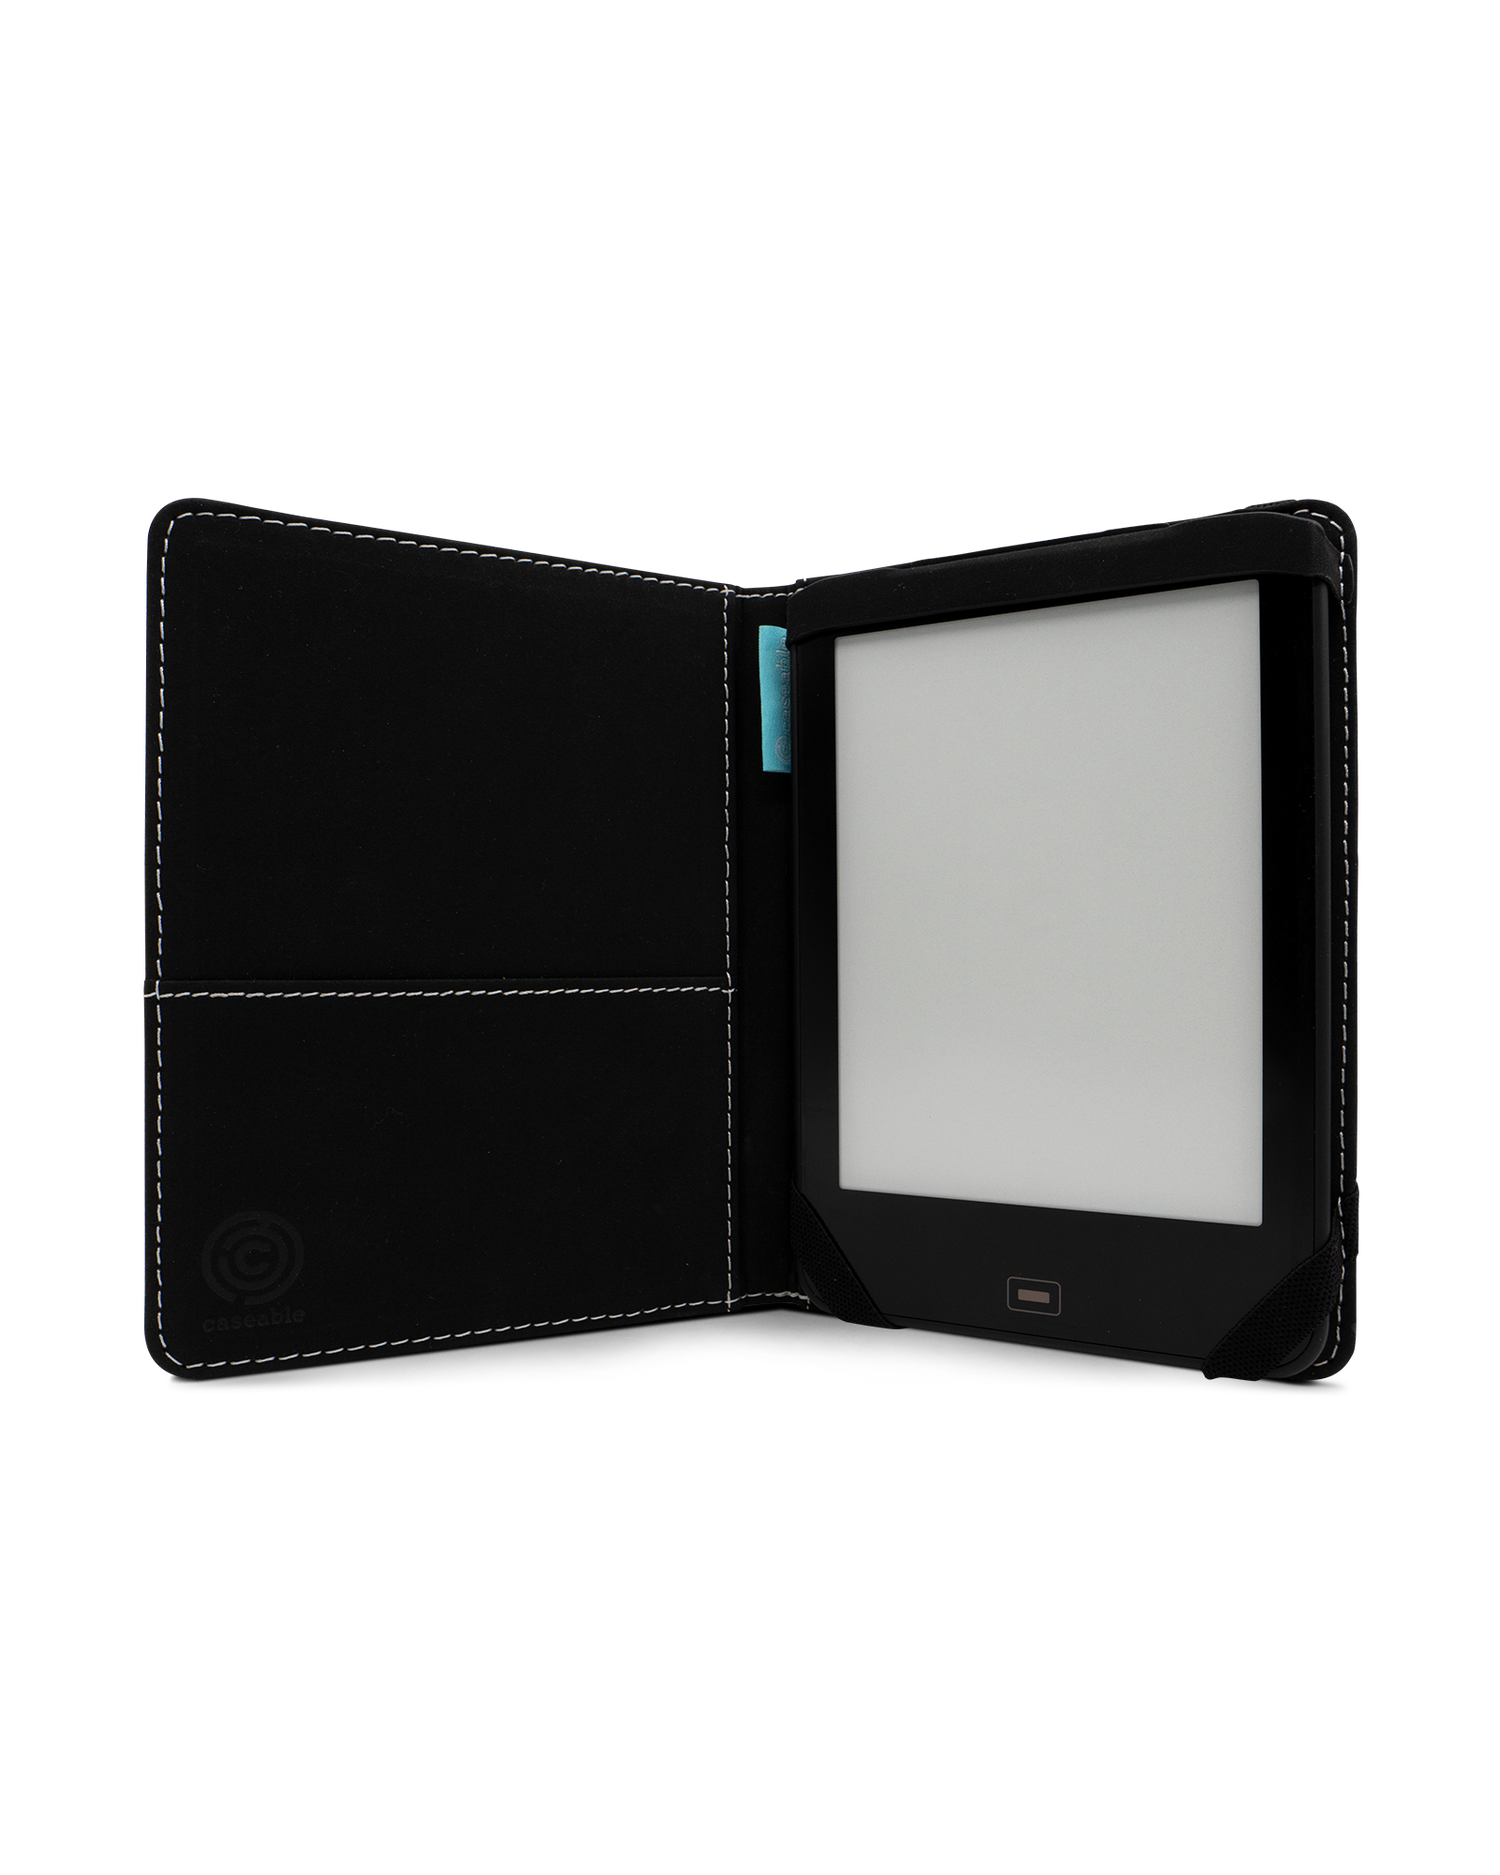 Deep Turquoise Sparkle eReader Case for tolino vision 1 to 4 HD: Opened interior view